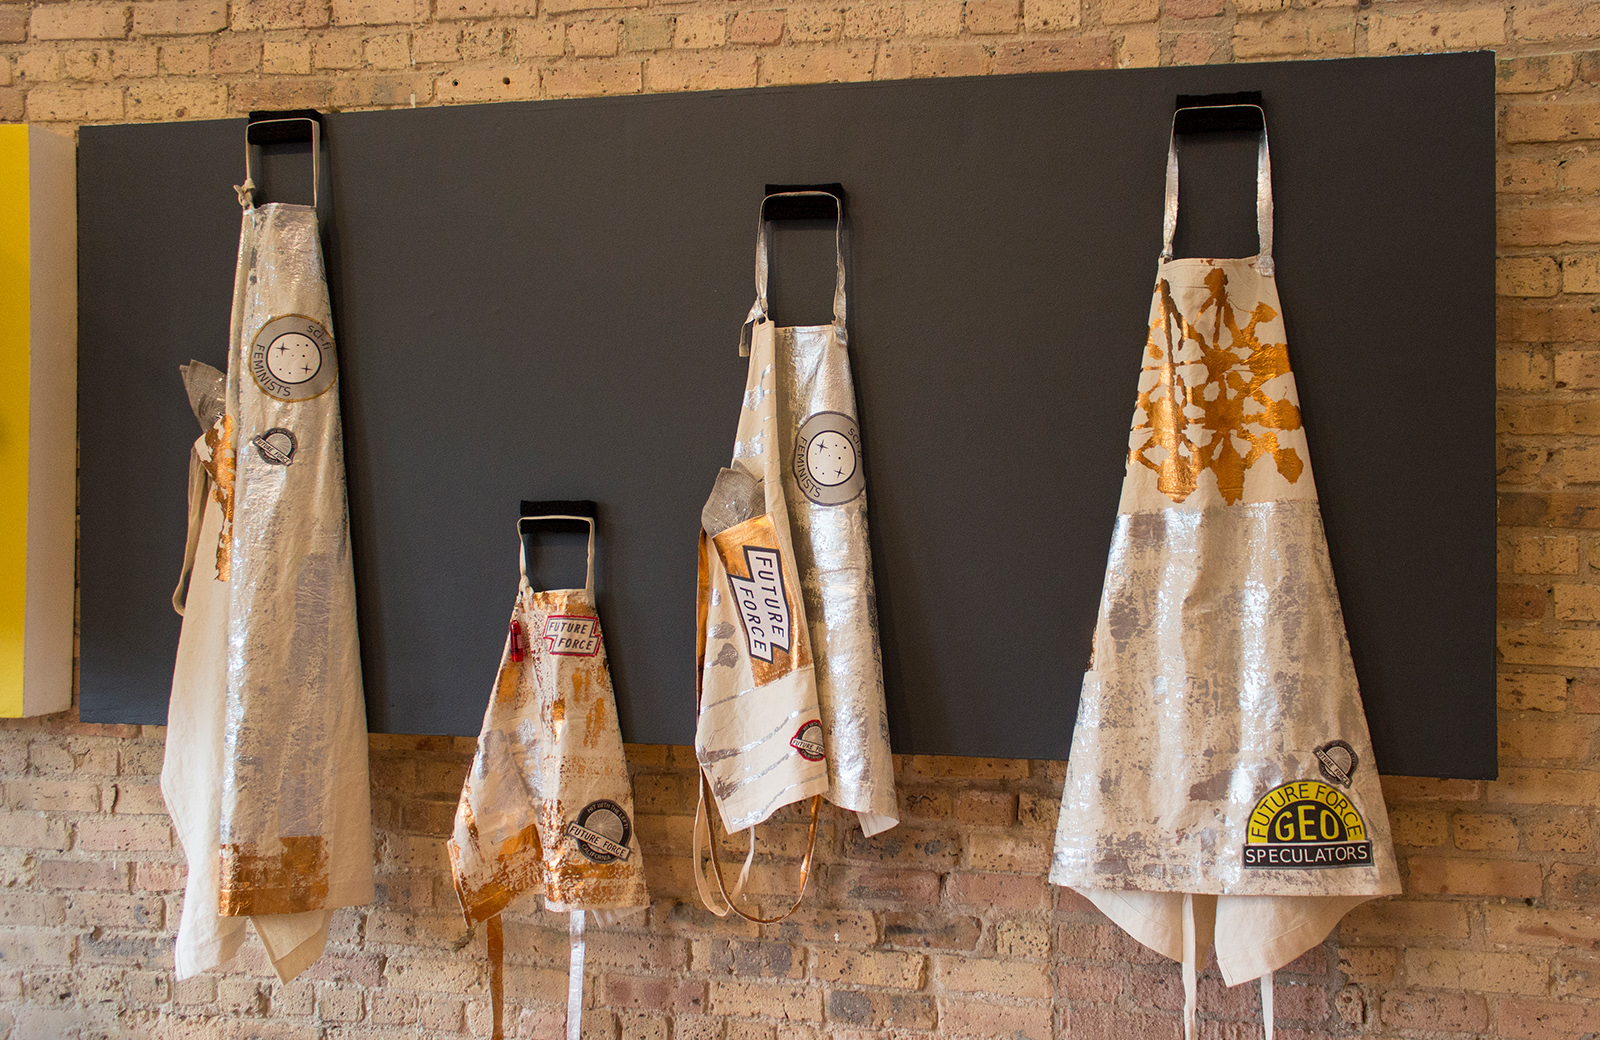  The Experimental Sound Studio, Chicago, 2014, Work Aprons: detail and installation view. Photo: Adam Liam Rose 